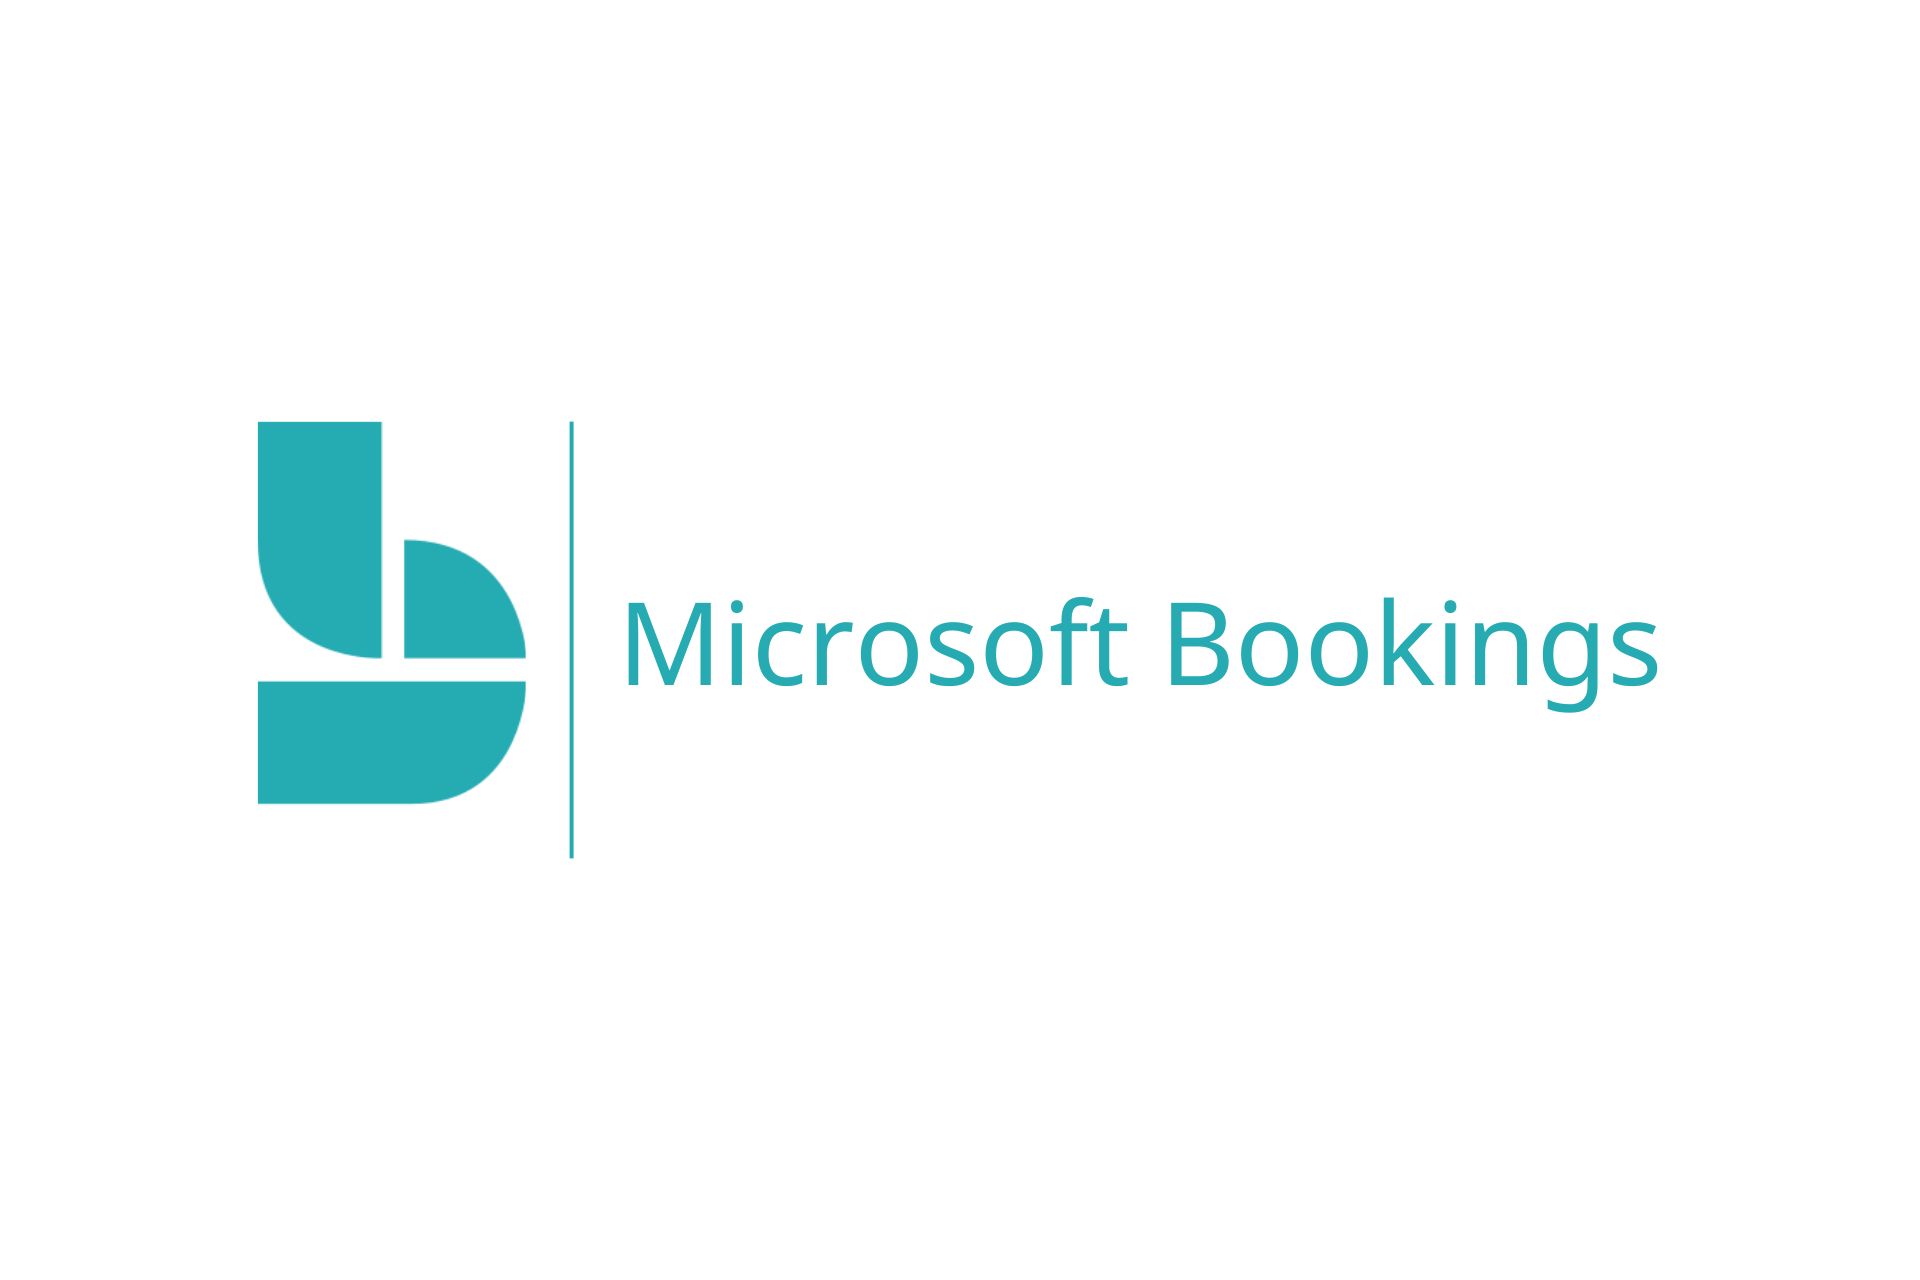 Microsoft Bookings - Microsoft 365 for Business